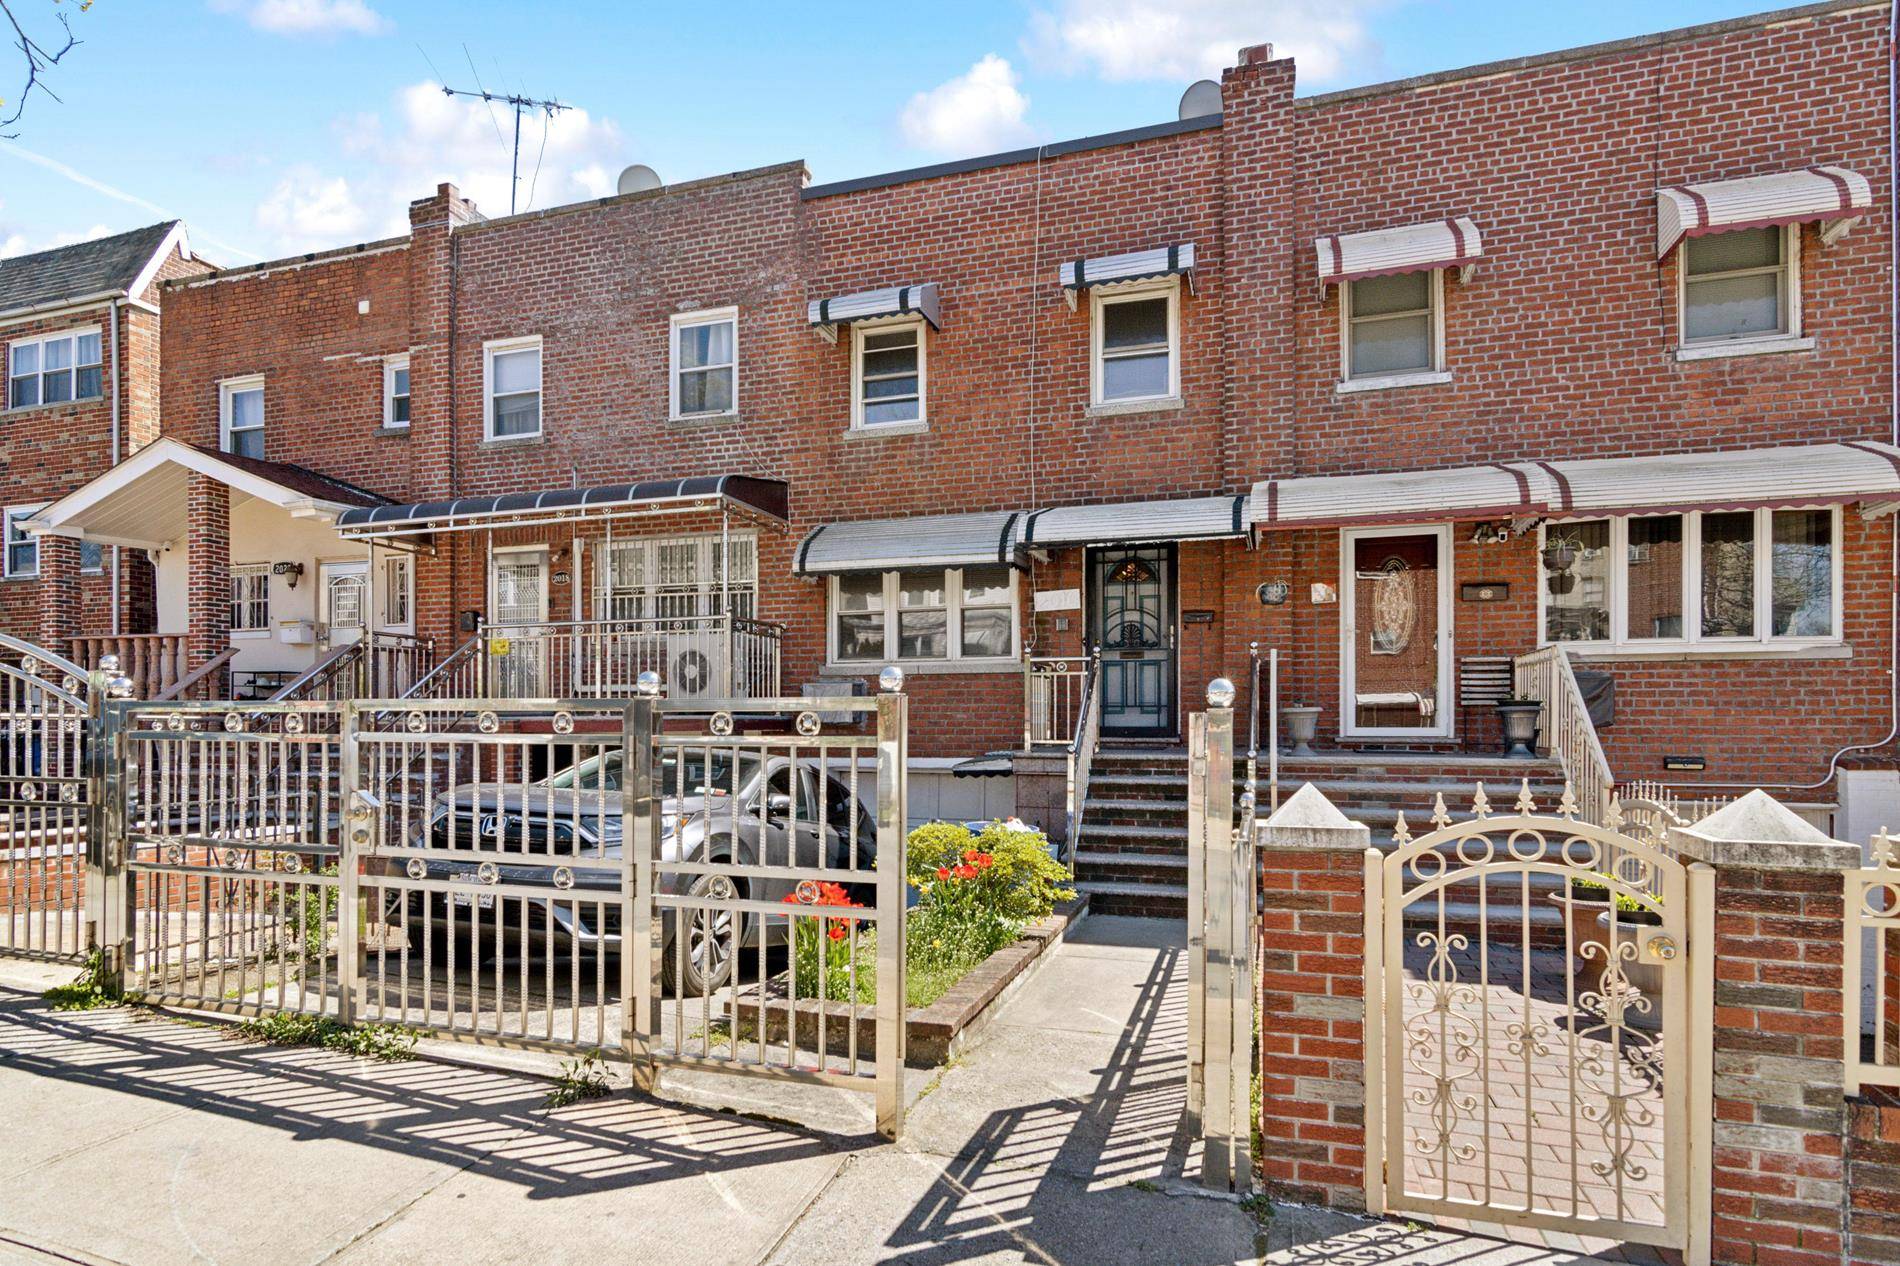 Conveniently located right off the FDR, this house has 2 large bedrooms with 1.